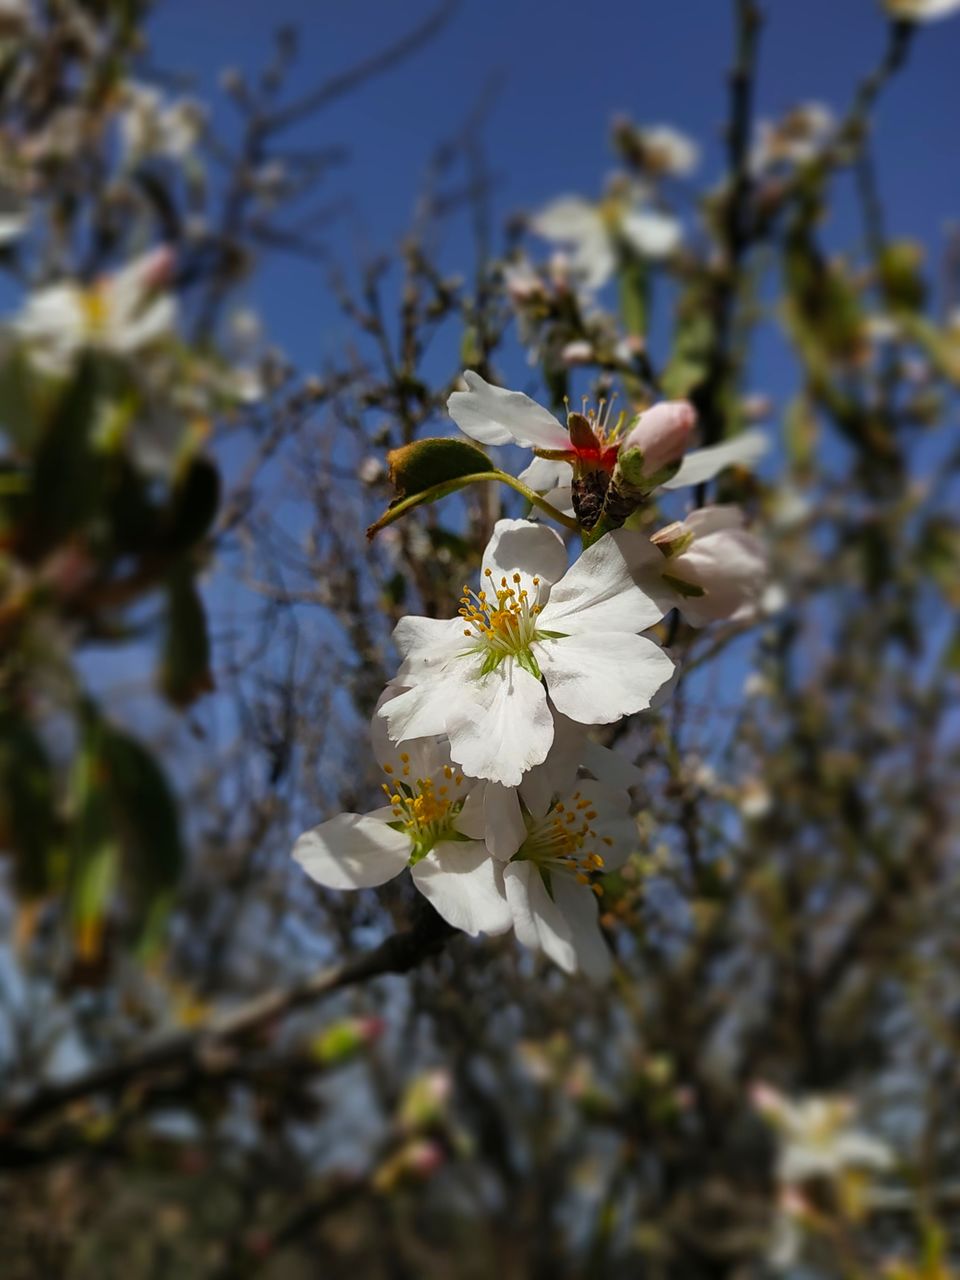 plant, flower, flowering plant, blossom, freshness, growth, fragility, beauty in nature, tree, nature, close-up, branch, spring, springtime, white, flower head, no people, petal, focus on foreground, day, produce, outdoors, inflorescence, fruit tree, twig, pollen, sky, botany, food